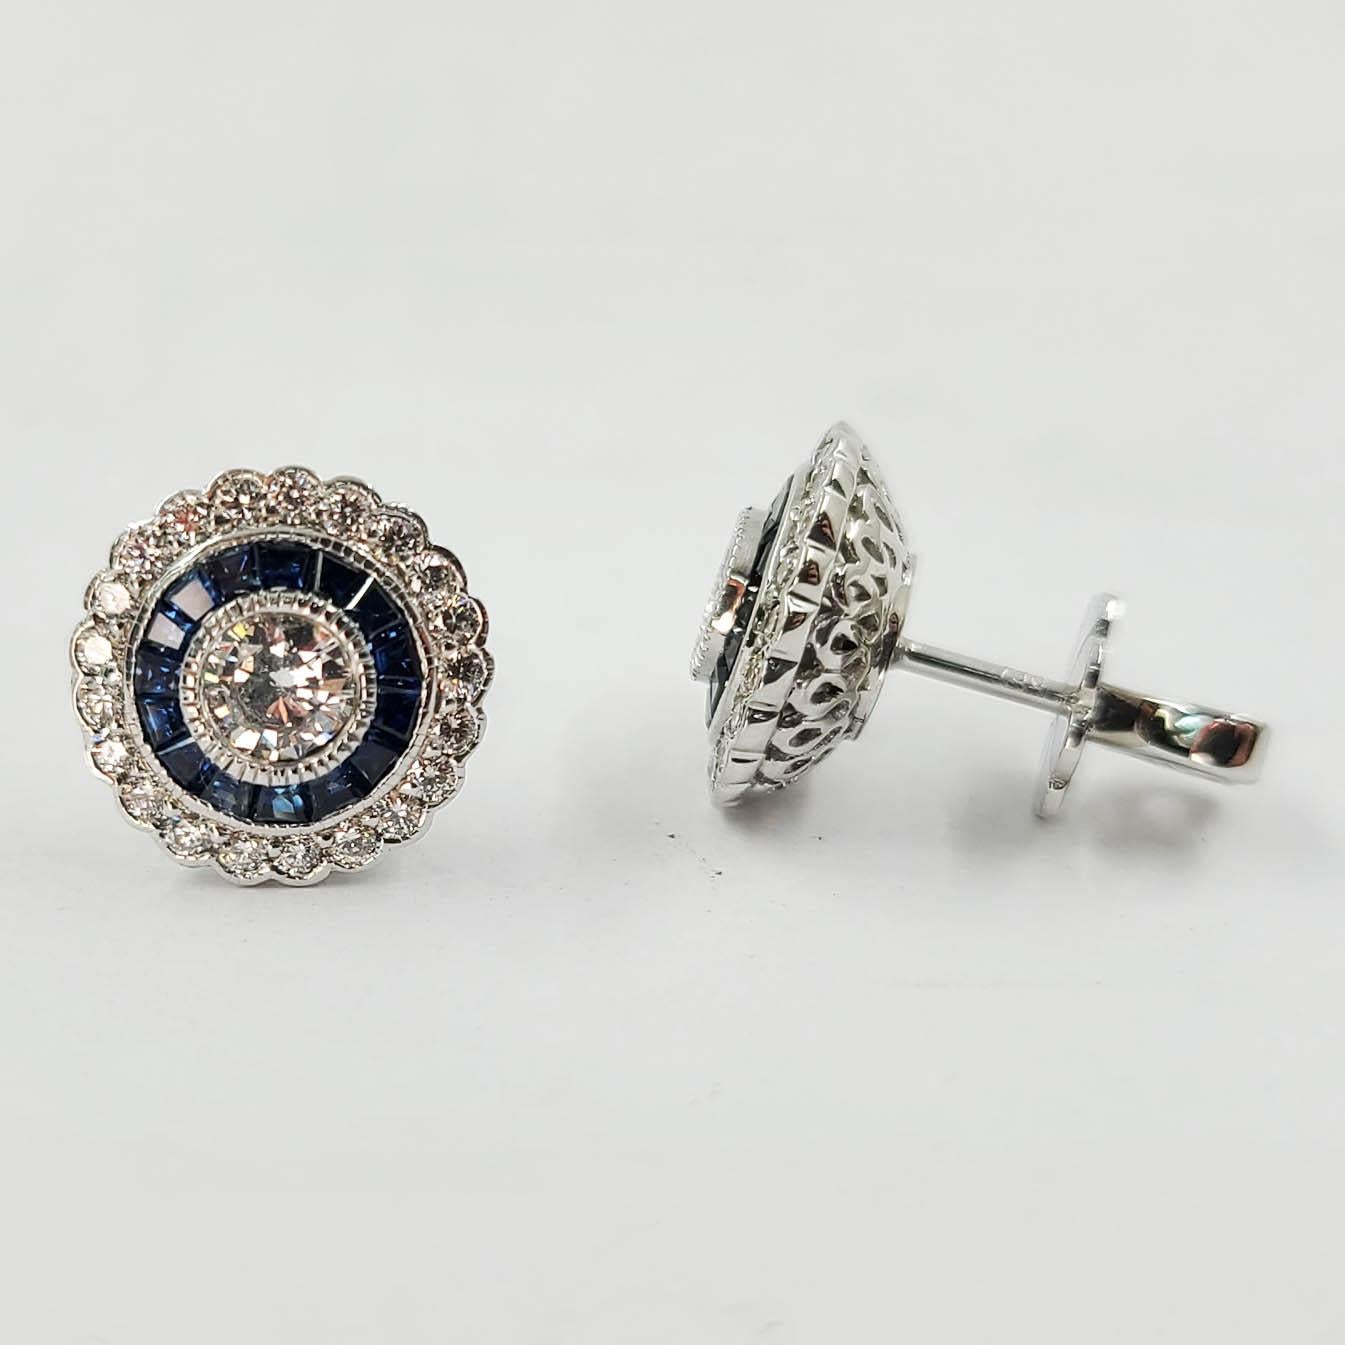 Vintage Inspired NEW 18 Karat White Gold Diamond & Sapphire Stud Earrings. 2 Round Bezel Set Diamonds Total 0.48 Carats of F Color & VS1 Clarity. 40 Round Diamonds Total 0.50 Carats & 30 Specialty Cut Blue Sapphires Total 0.75 Carats. Detailed